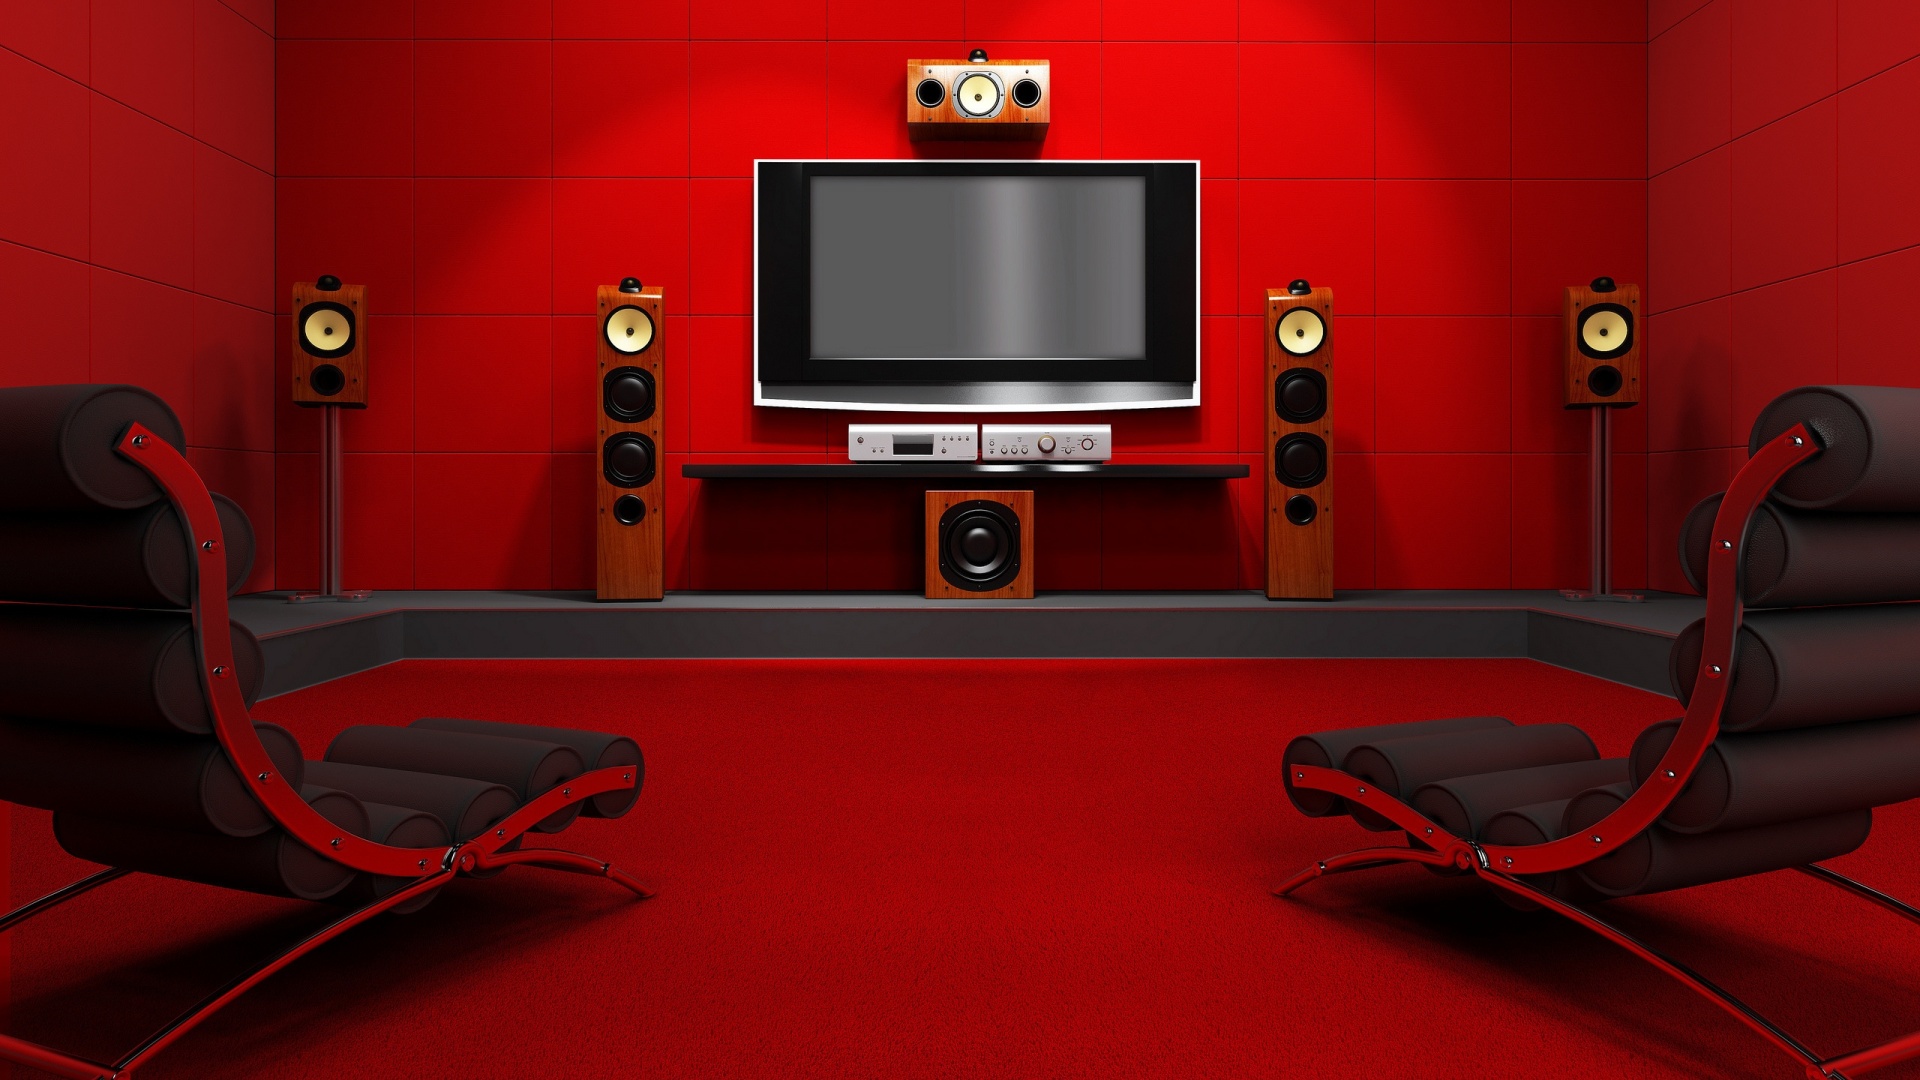 red room wallpaper wallpapers house 1920x1080 1920x1080